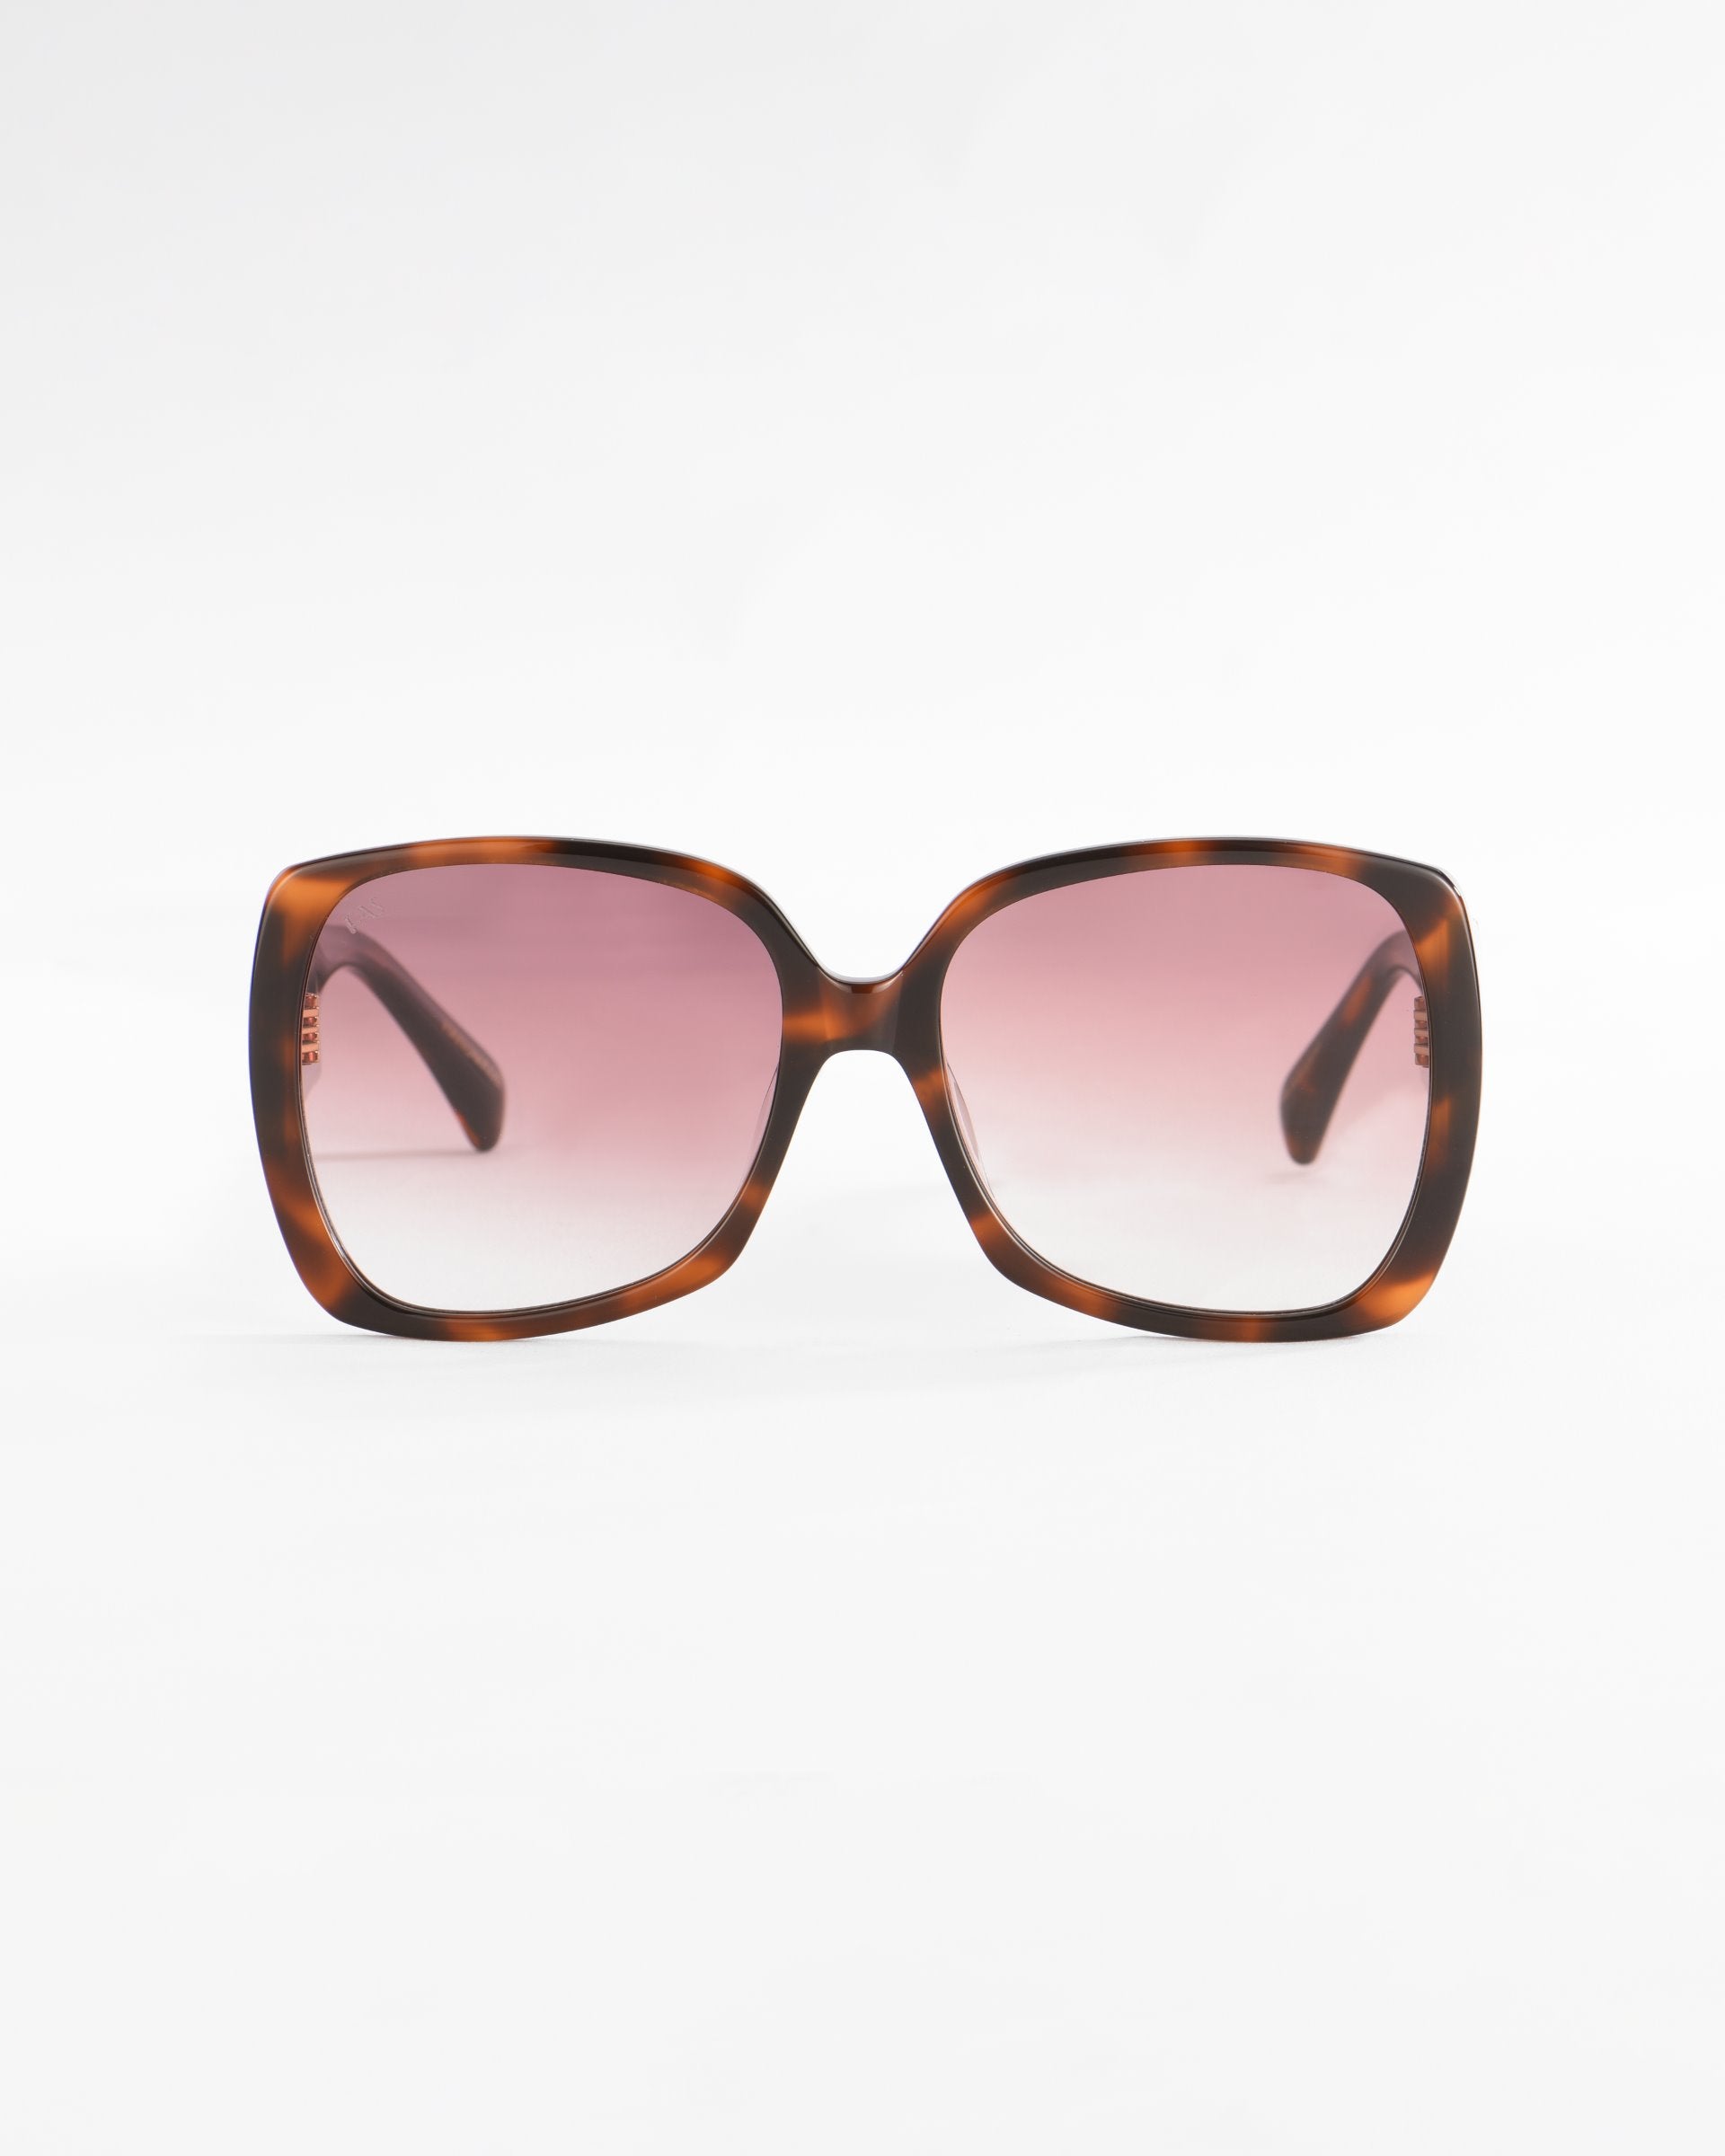 A pair of oversized, square-framed sunglasses with a tortoiseshell pattern made from plant-based acetate. The lightweight nylon lenses are tinted in a gradient, transitioning from dark to light pink. The background is plain and white. These are the Odyssey sunglasses by For Art's Sake®.